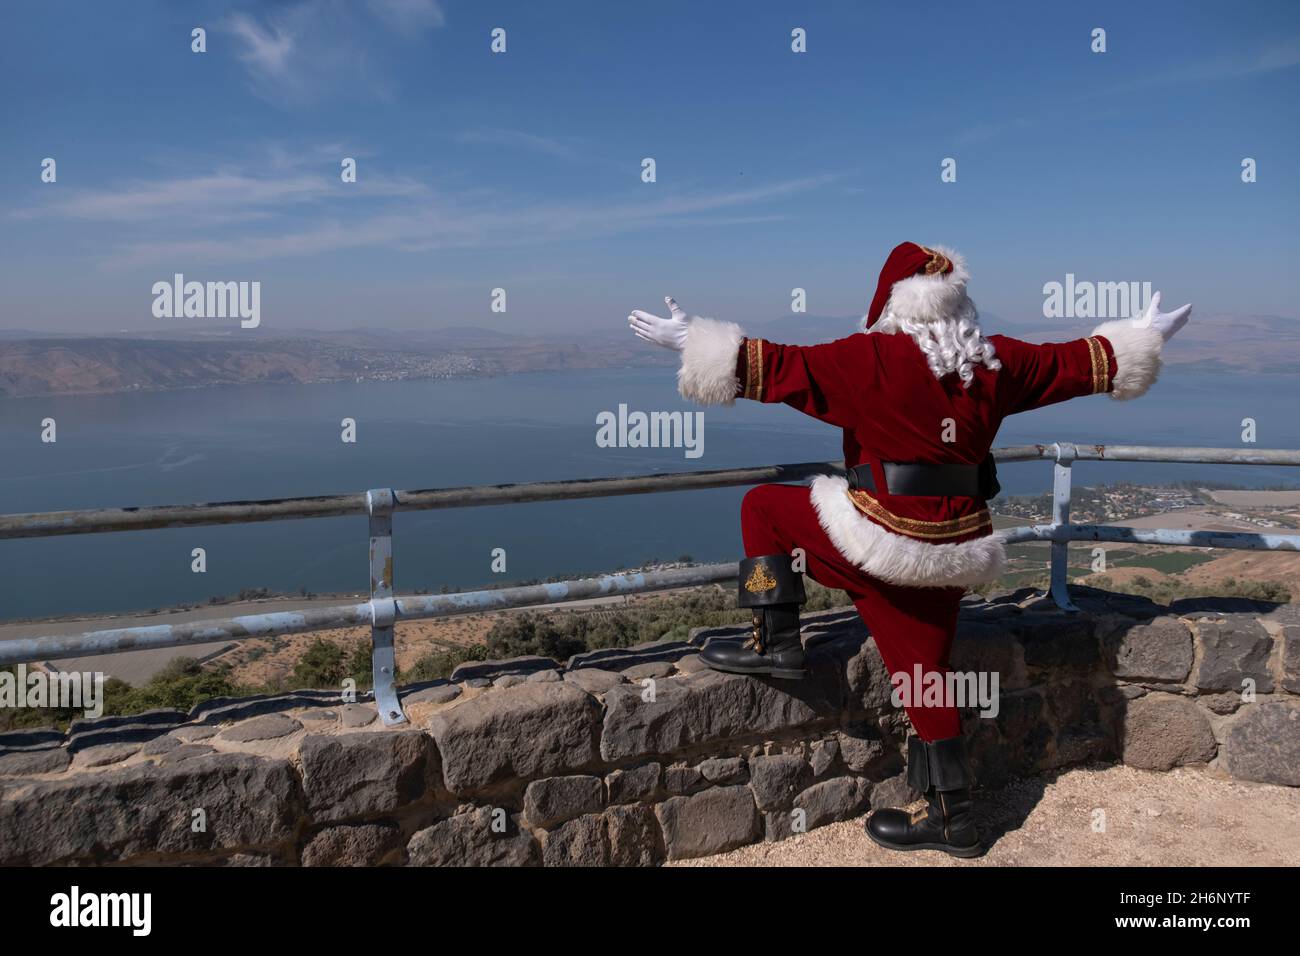 Issa Kassissieh, an Arab Orthodox Christian and Israel’s only certified Santa Claus reacts as hew stands at Mitzpe Shalom, also known as Peace Lookout located at the eastern side of the Sea of Galilee in Israel. Stock Photo